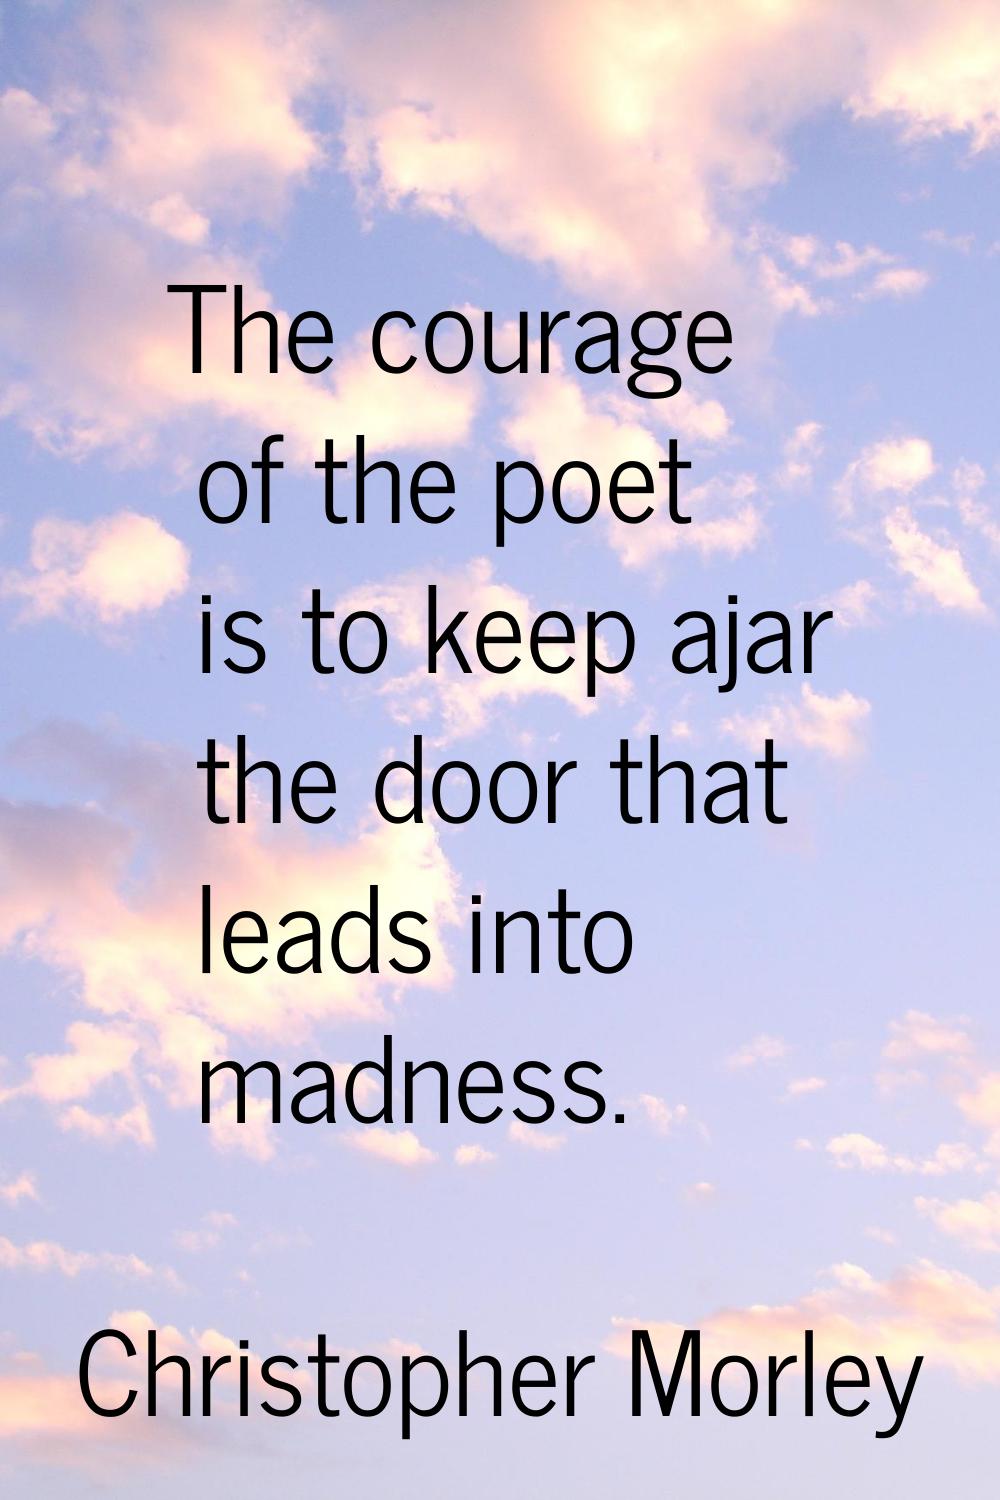 The courage of the poet is to keep ajar the door that leads into madness.